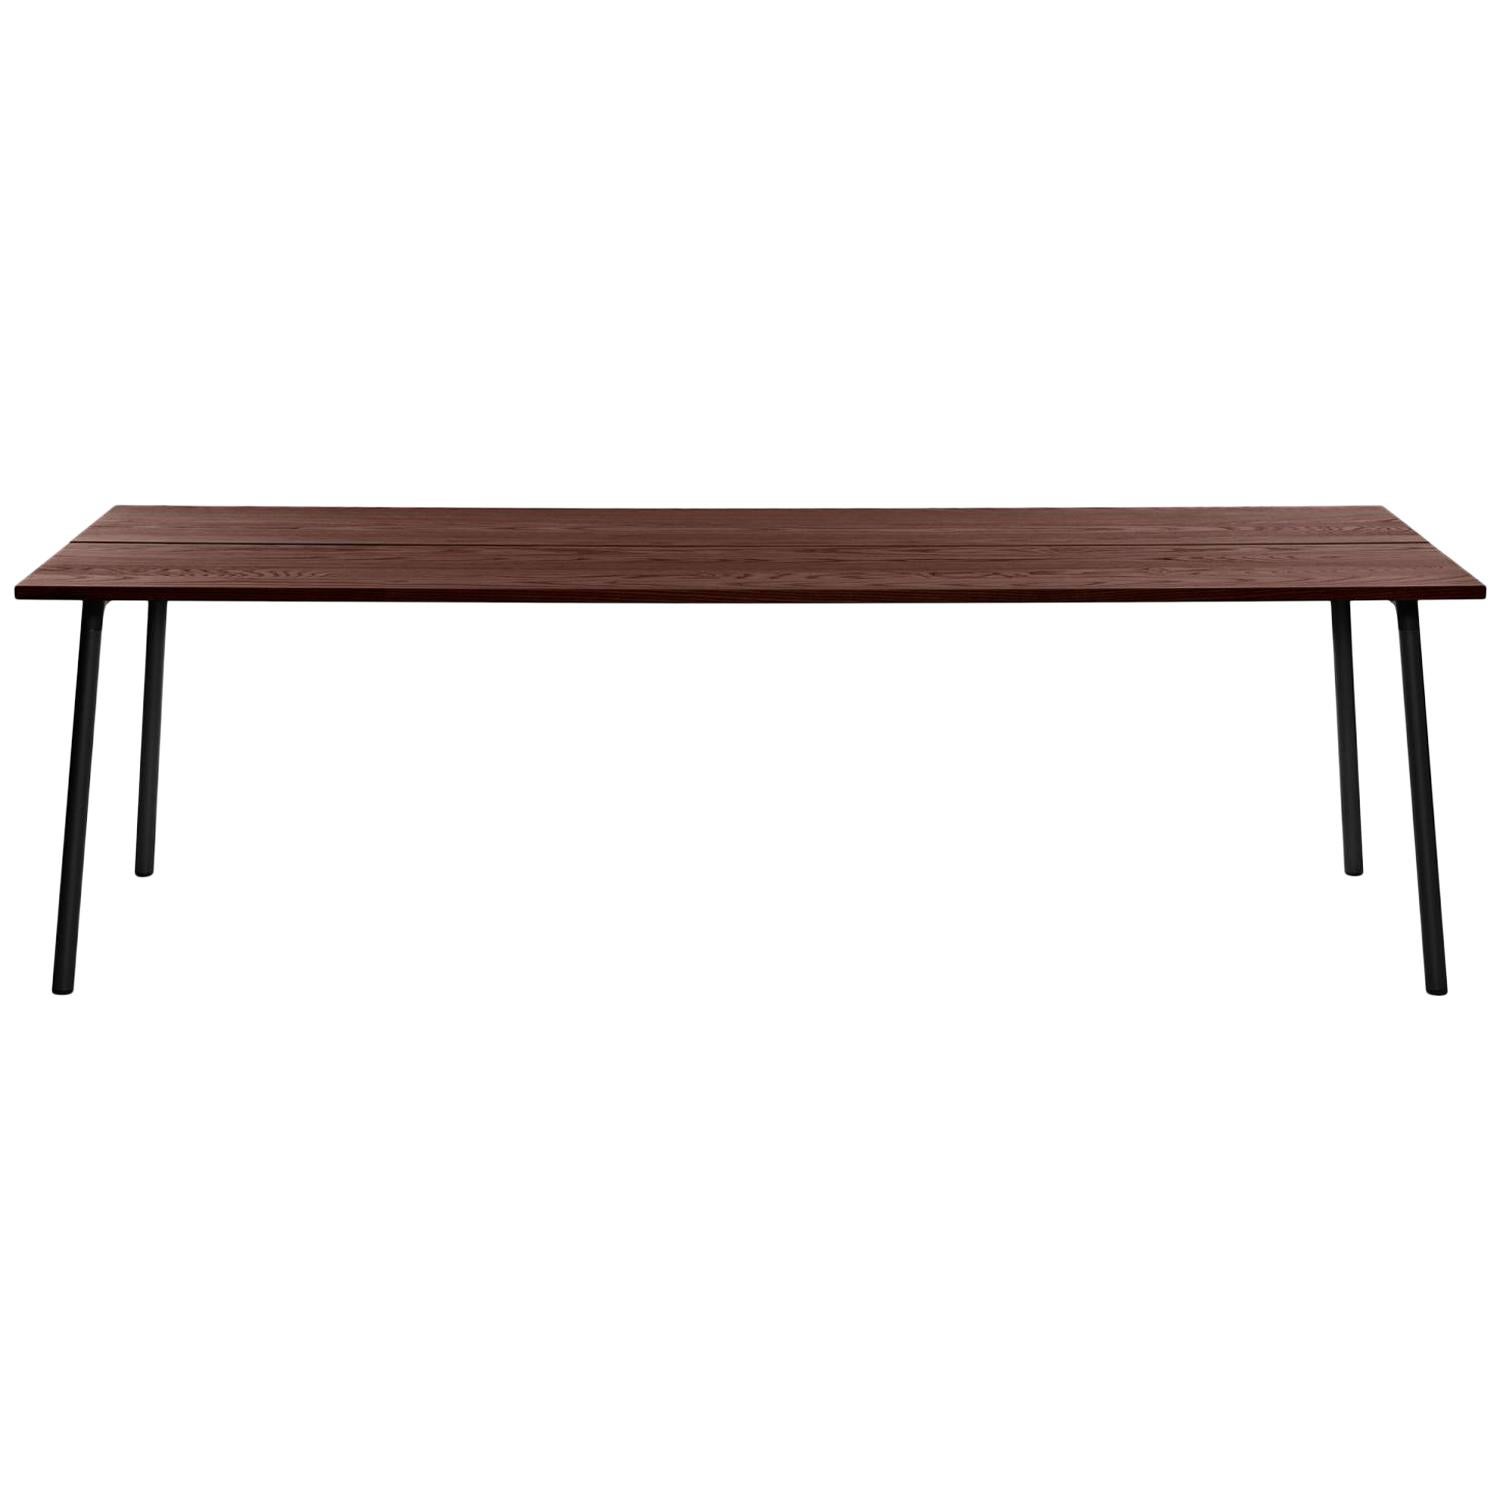 Emeco Run Extra Large Table in Black Powder-Coat & Walnut, Sam Hecht & Kim Colin For Sale